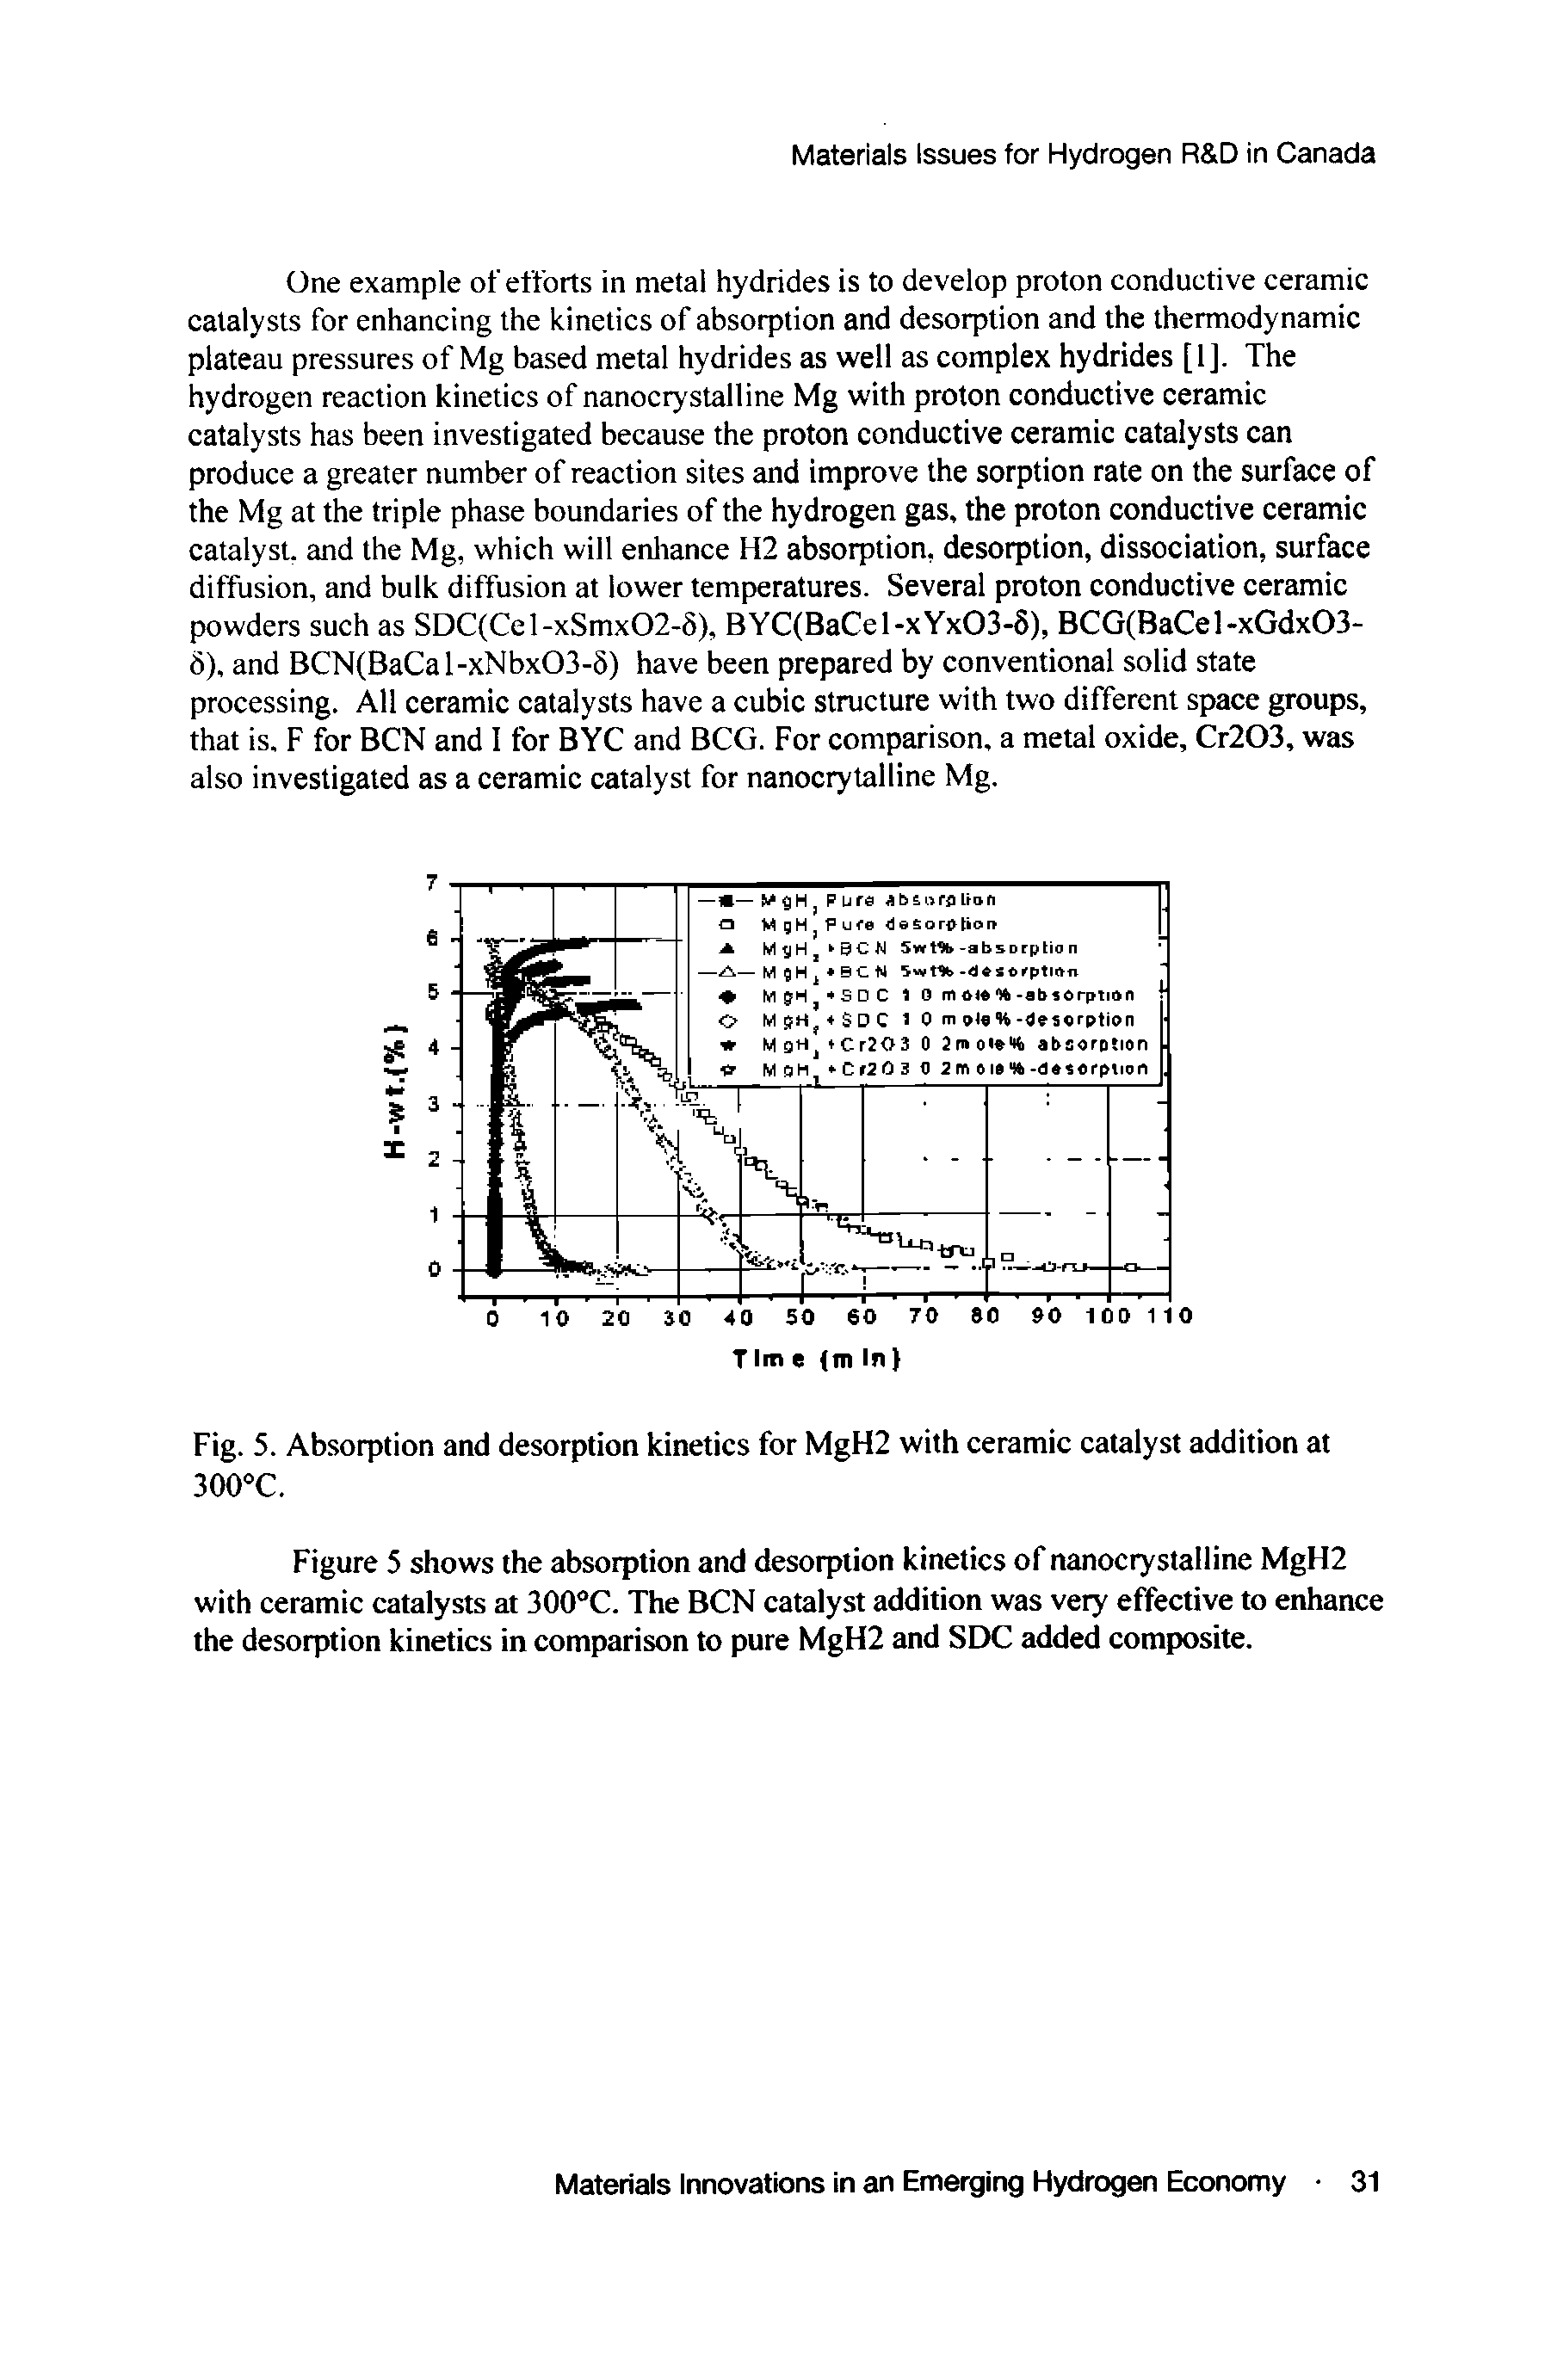 Fig. 5. Absorption and desorption kinetics for MgH2 with ceramic catalyst addition at 300°C.